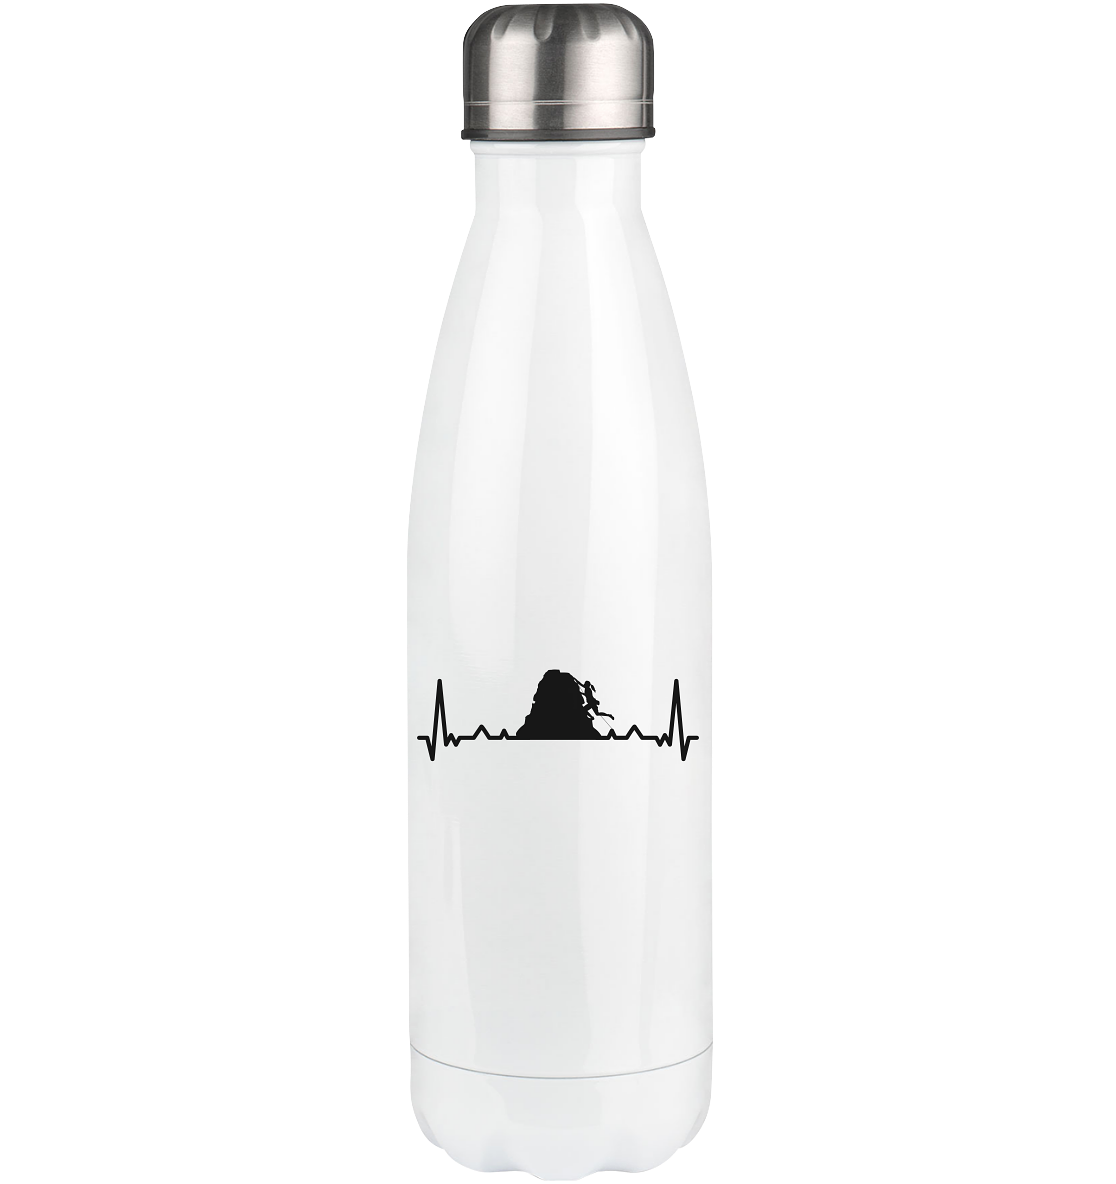 Heartbeat and Climbing - Edelstahl Thermosflasche klettern 500ml